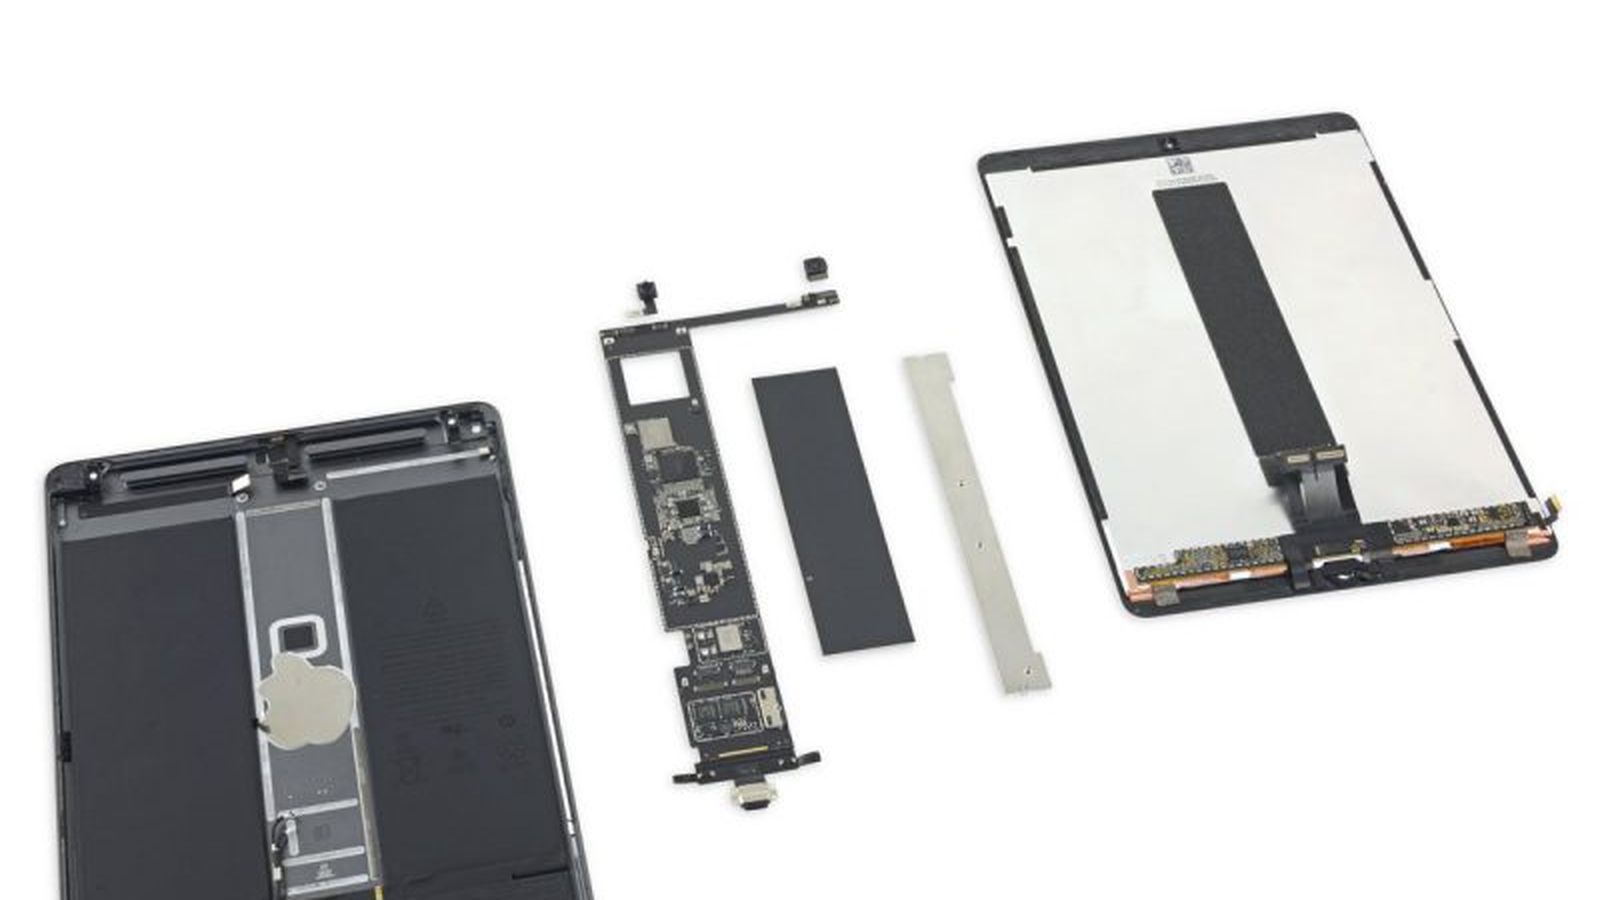 This Refurbished iPad Mini is Packed With an A12 Bionic Chip